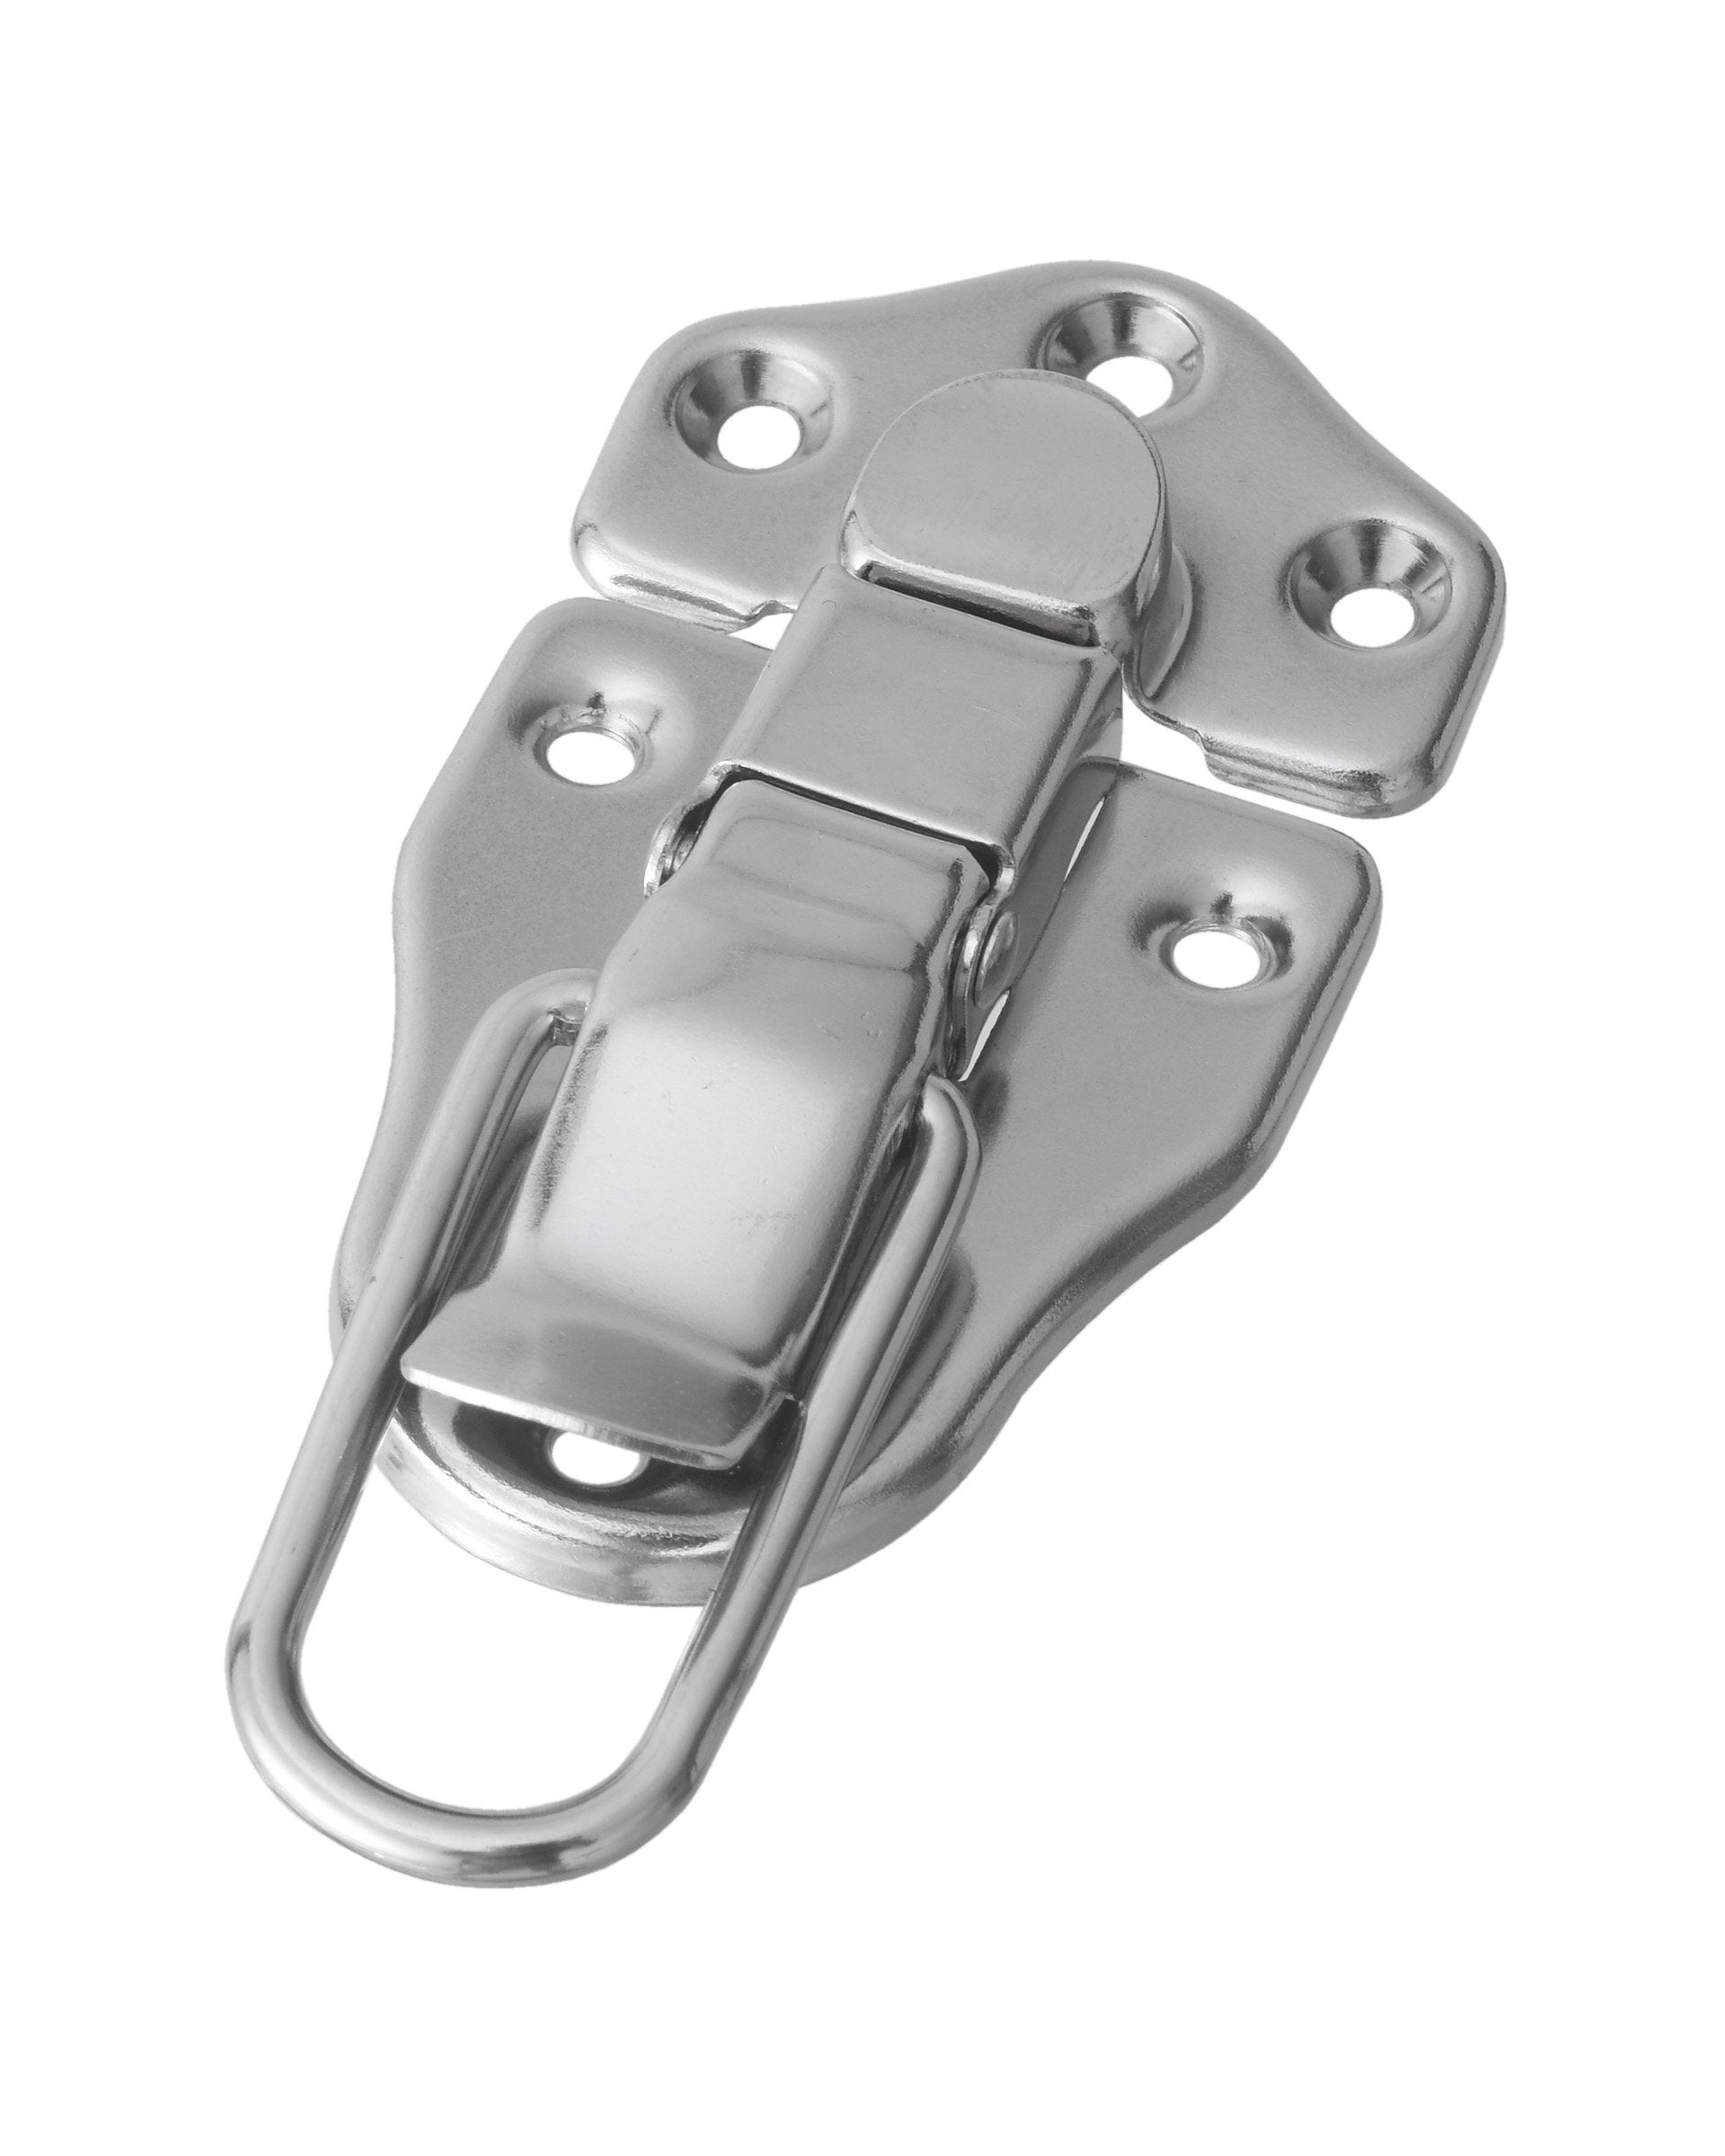 Front of Nickel Drawbolt Case Latch